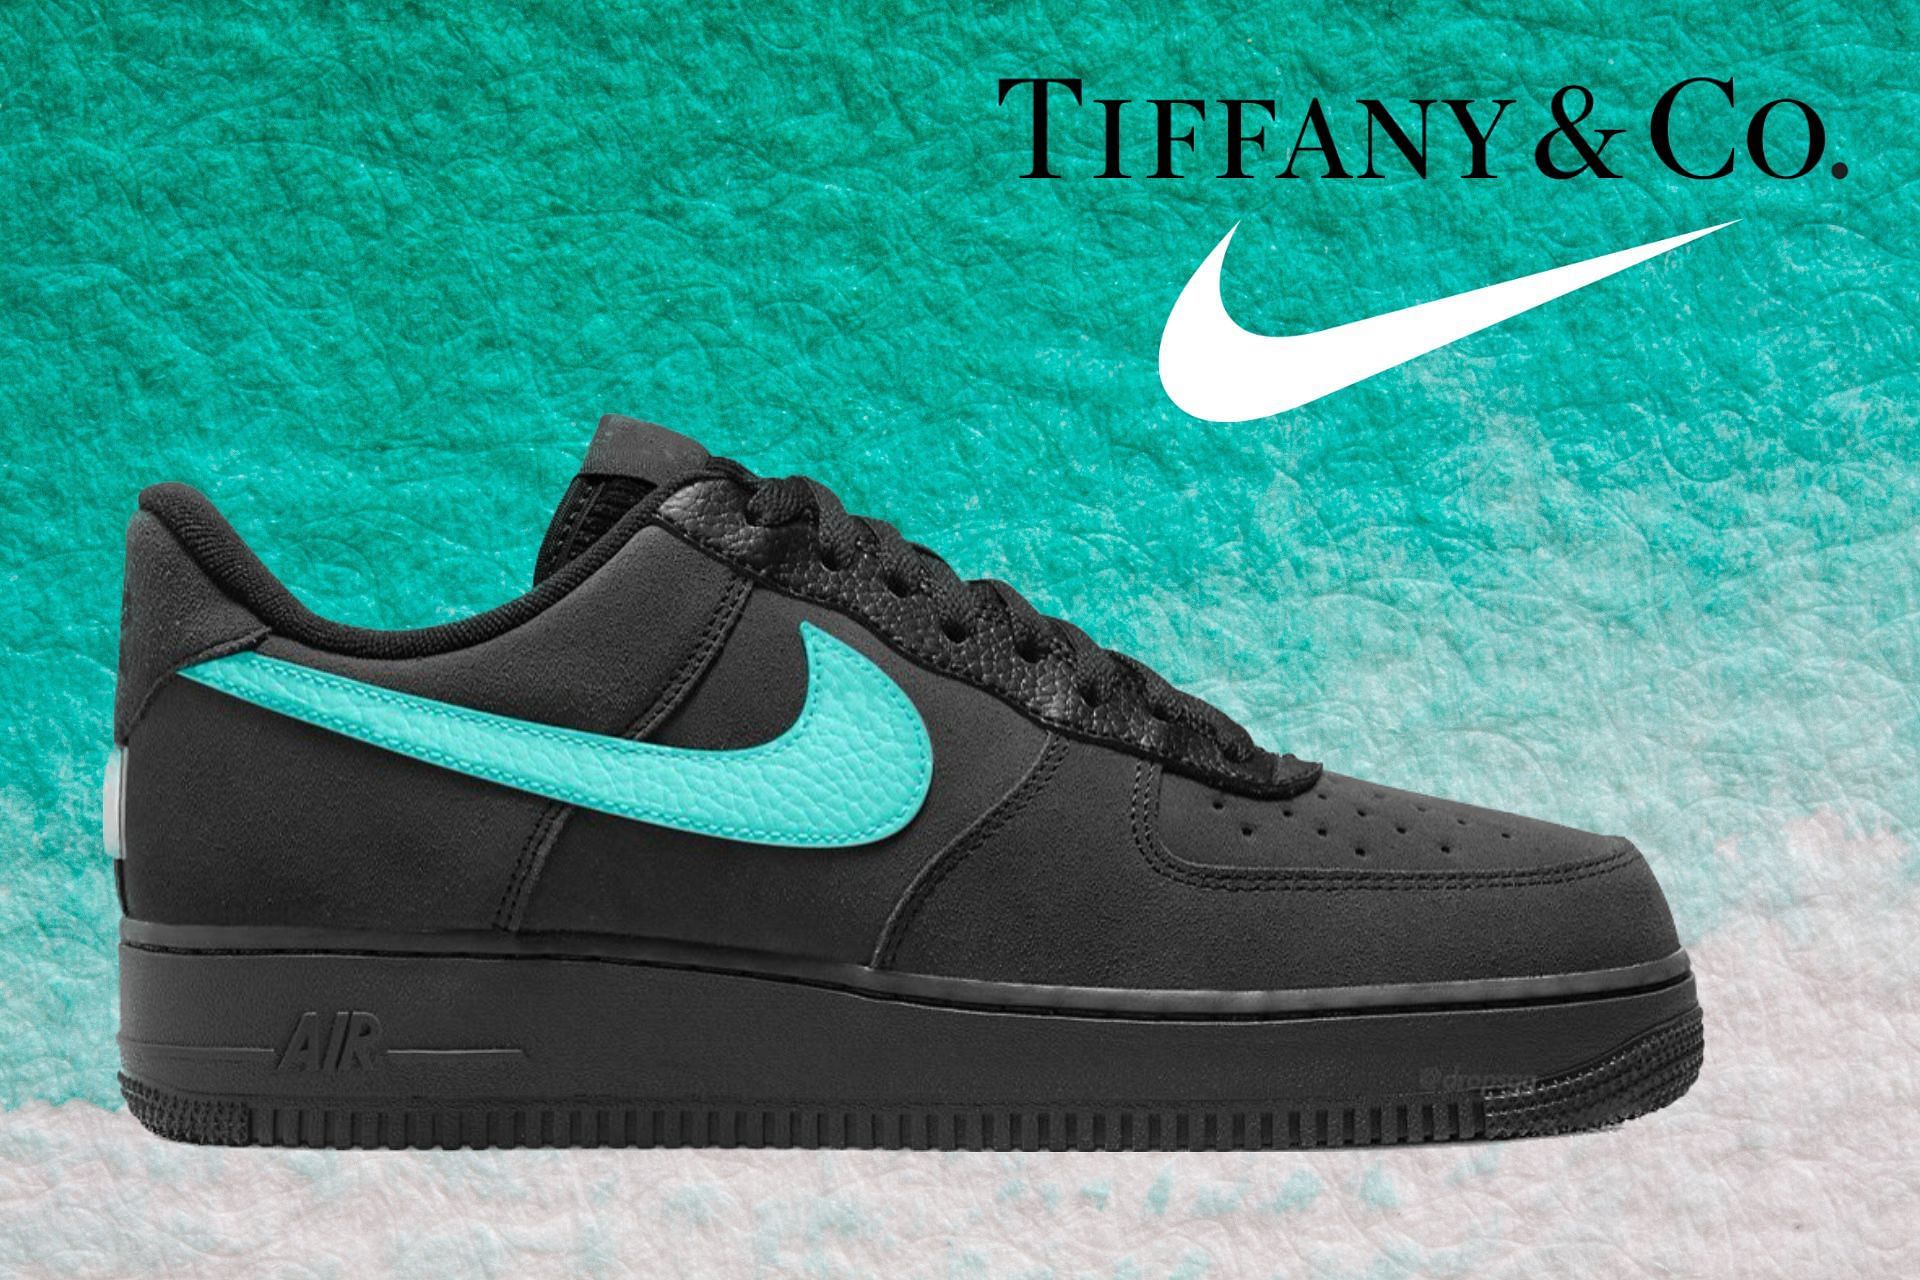 Tiffany Co.: Tiffany & Co. x Nike Air Force 1 Low "1837" shoes: to buy, price, and more details explored